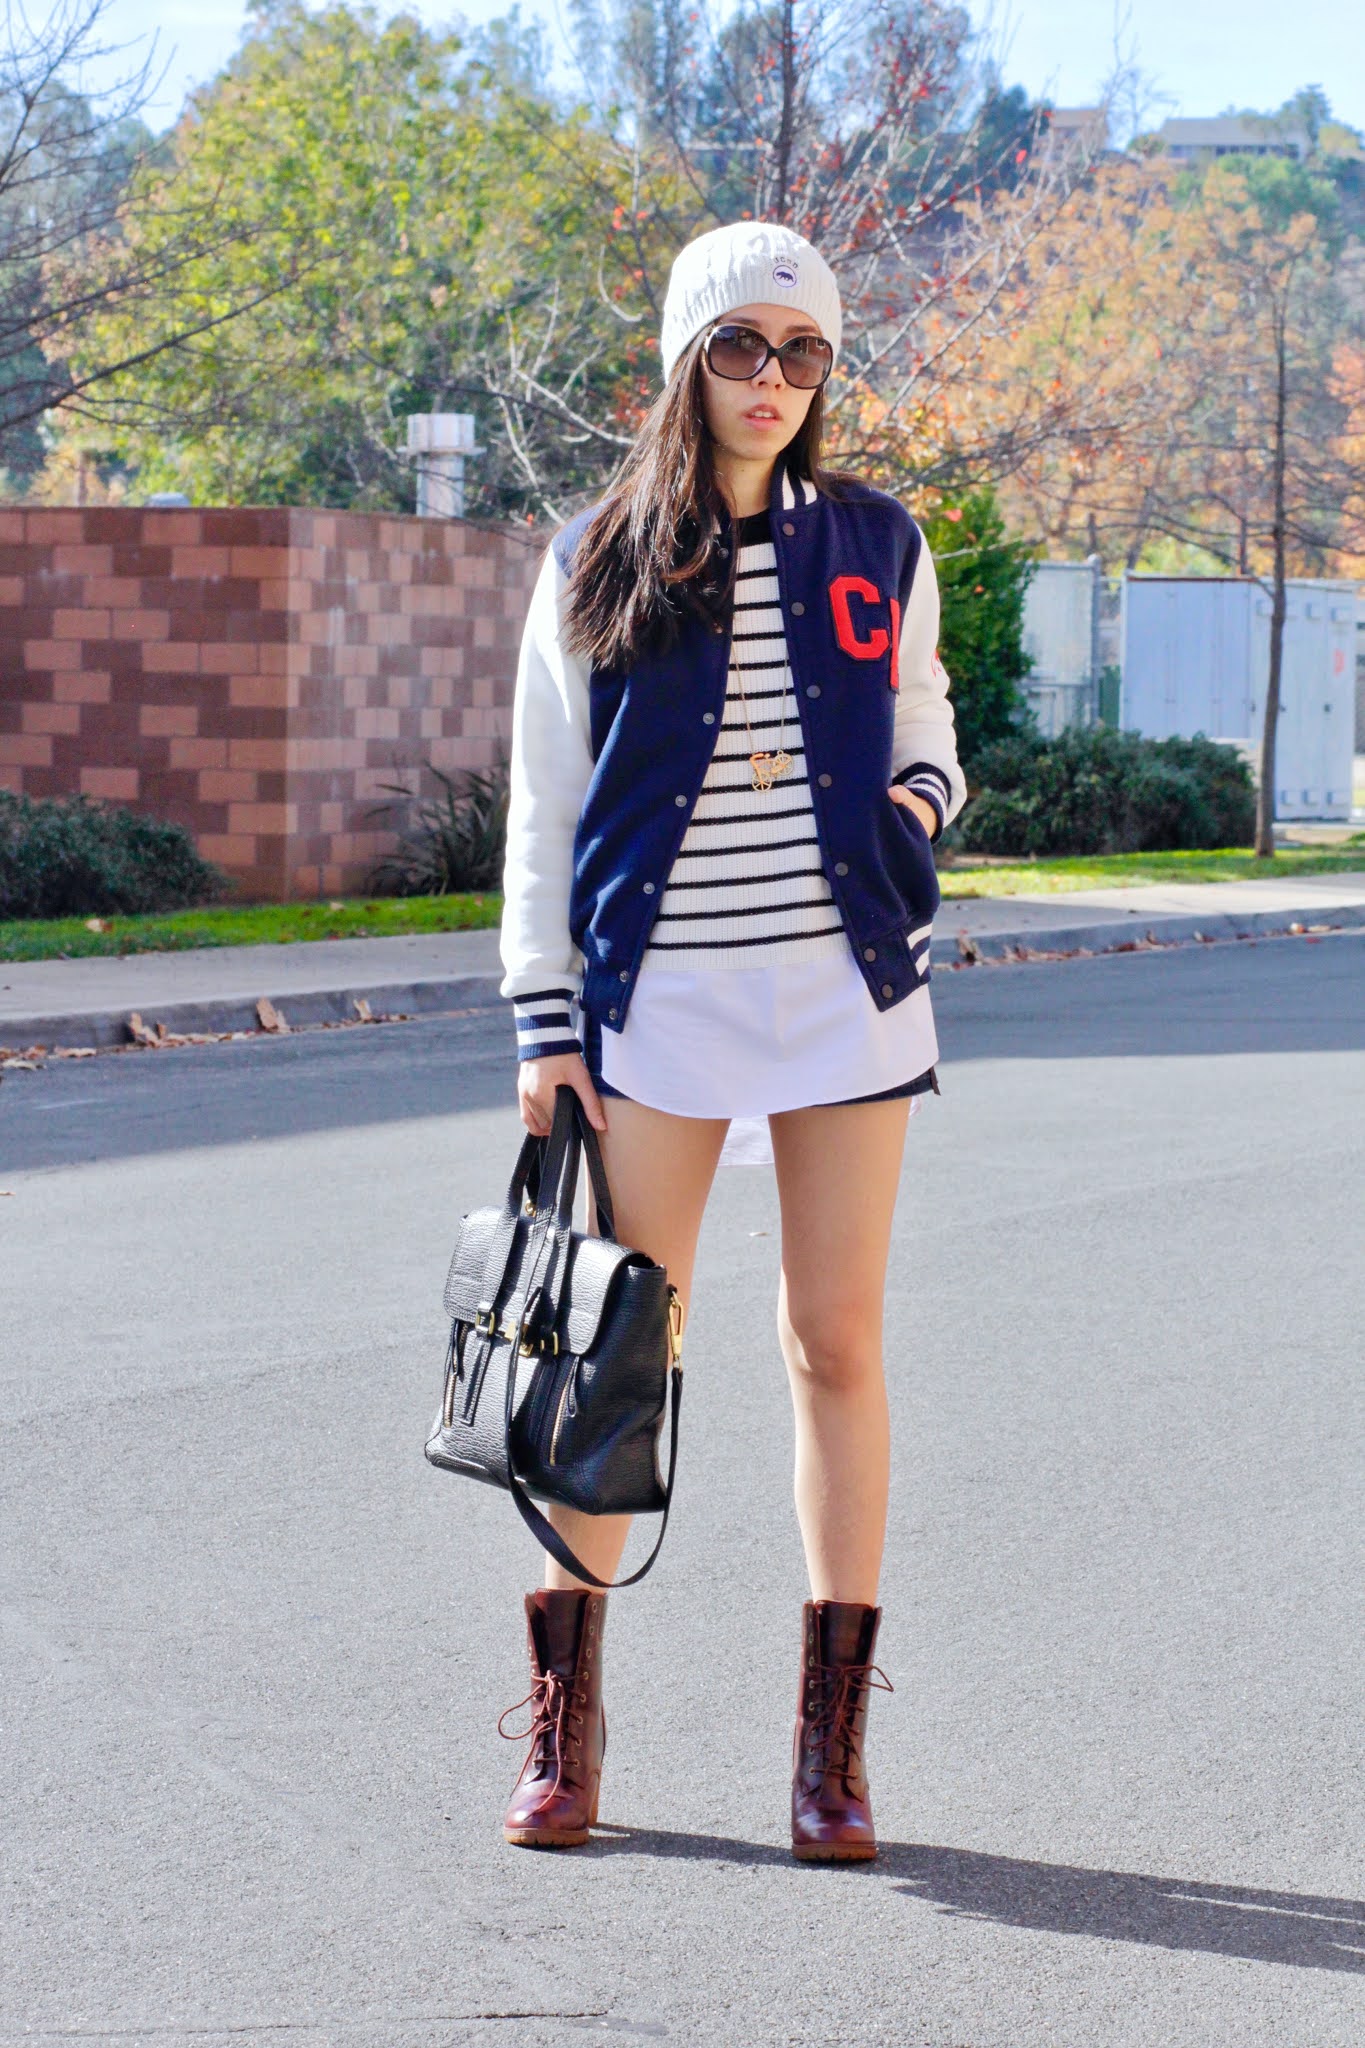 Women's Varsity Jacket and Denim Shorts with Timberland Boots Ideas_Adrienne Nguyen